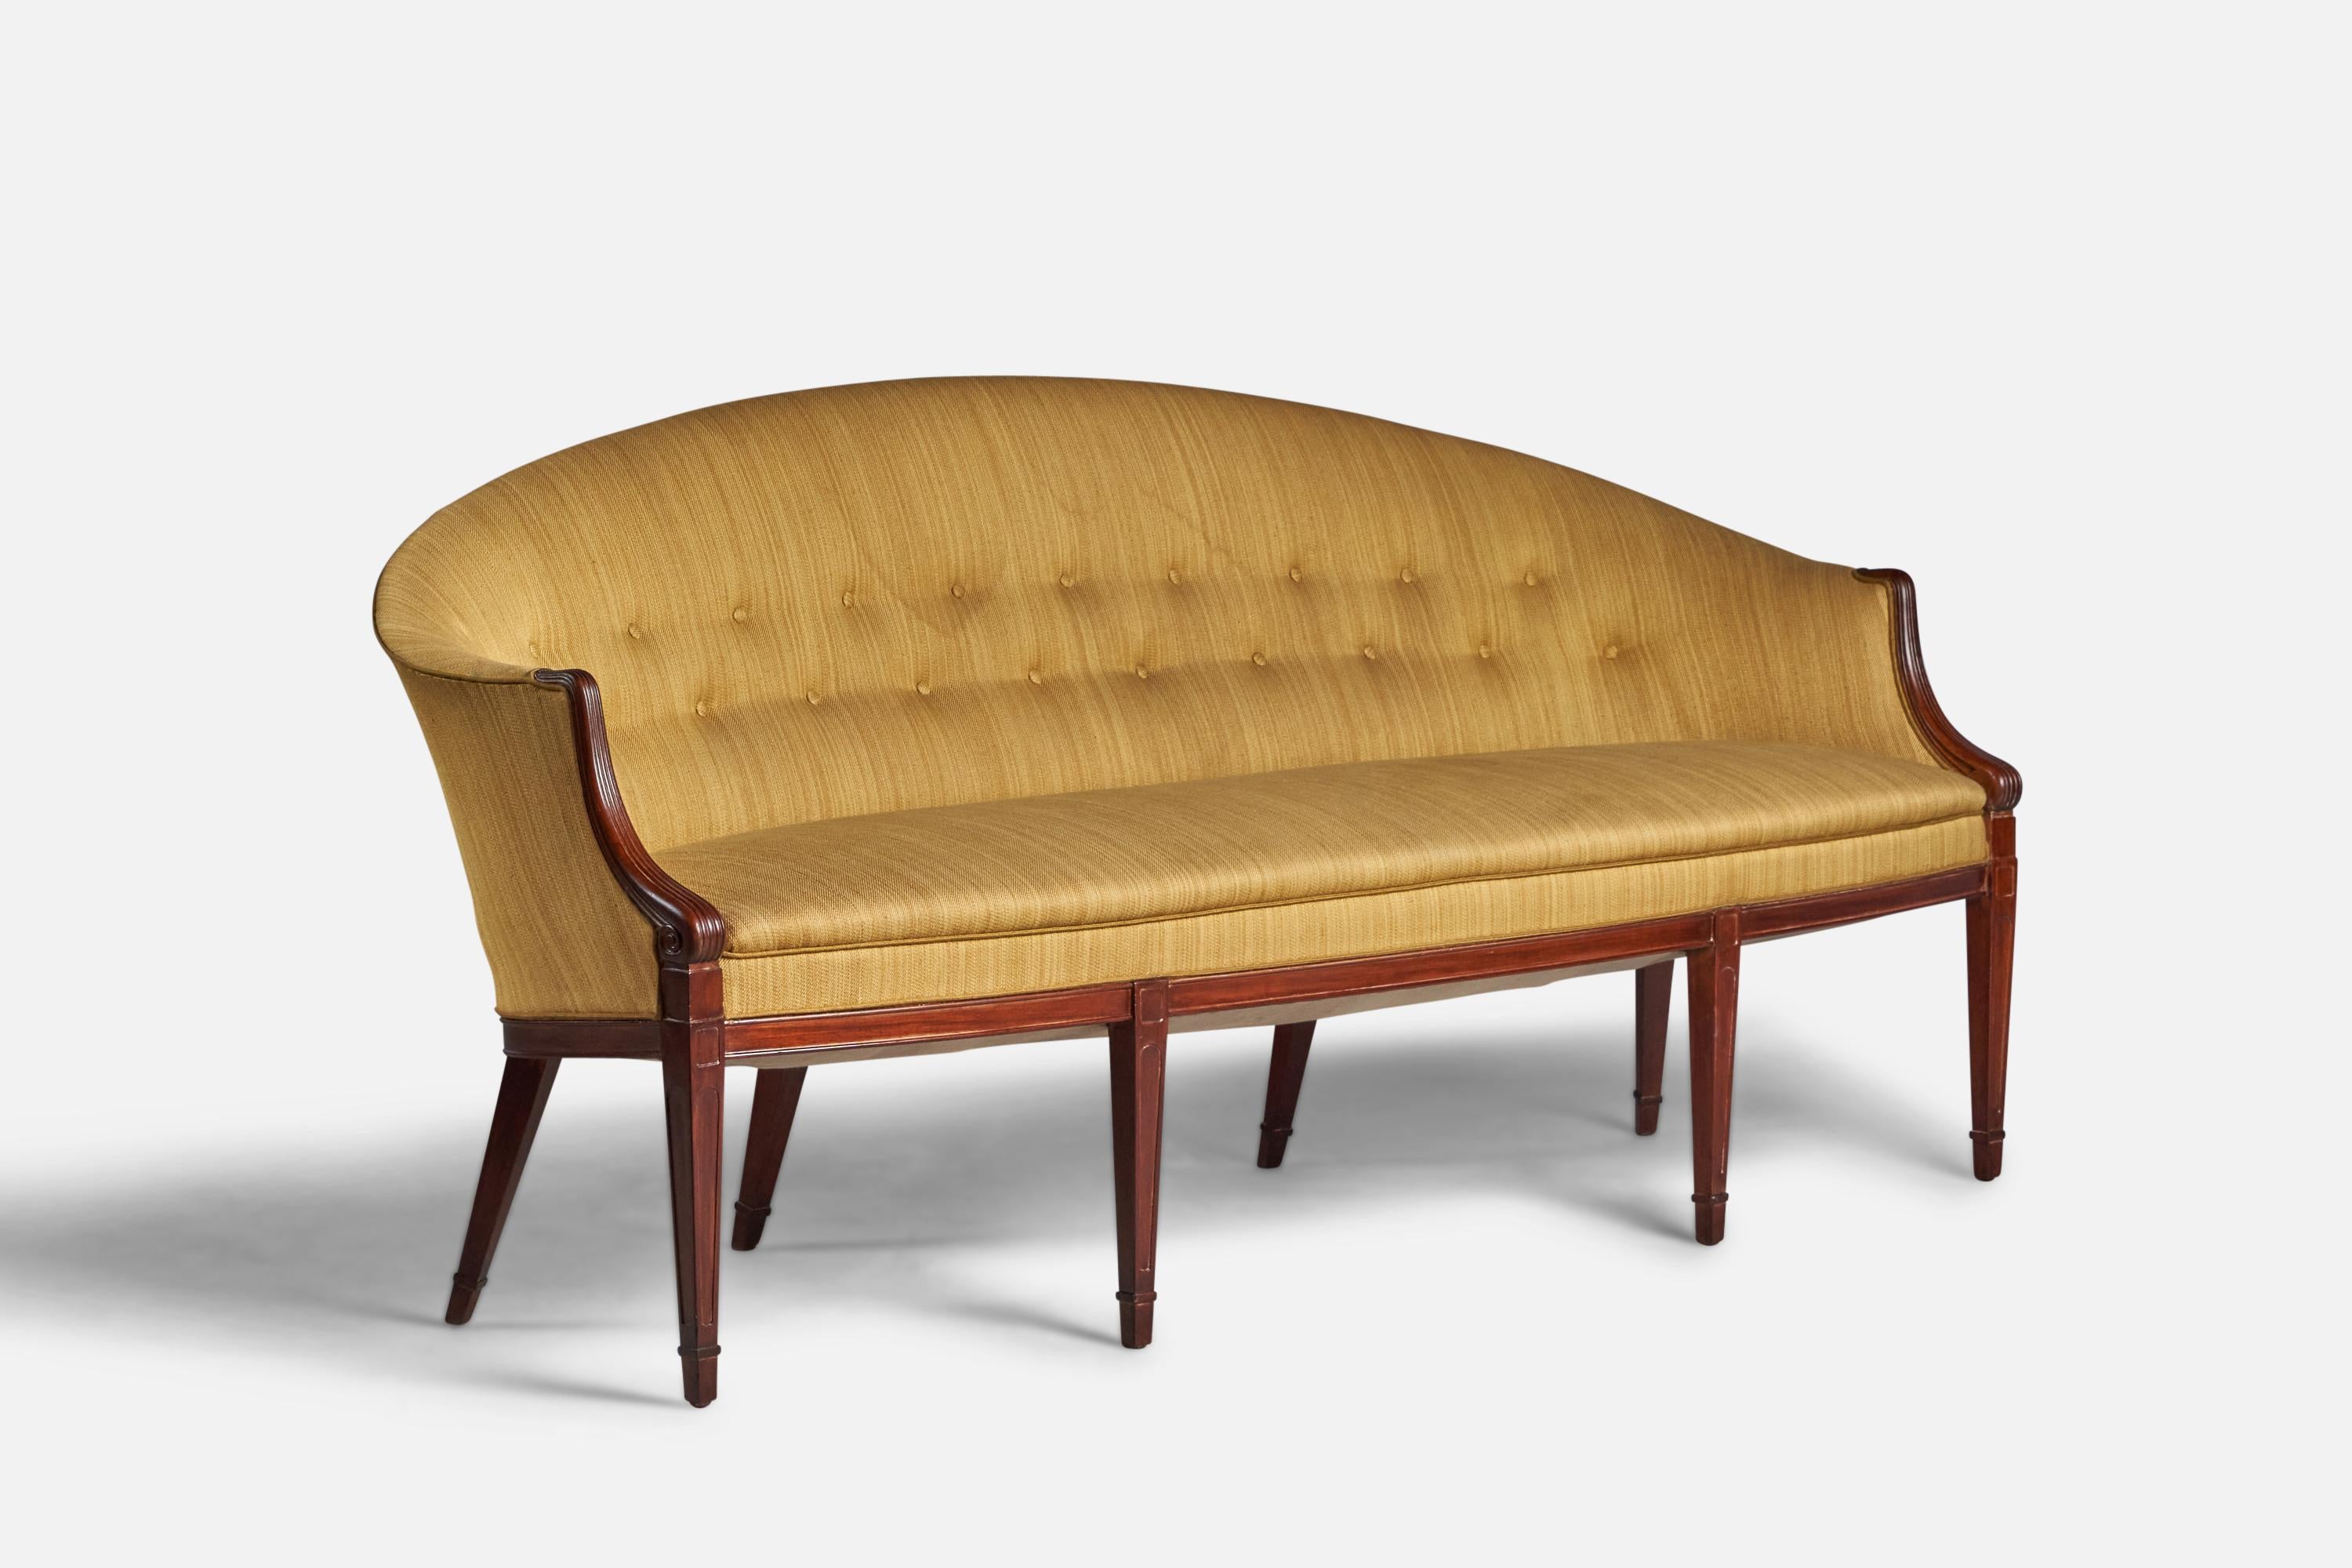 A stained mahogany and yellow horsehair fabric sofa or settee designed and produced by Frits Henningsen, Denmark, 1940s.

18” seat height

